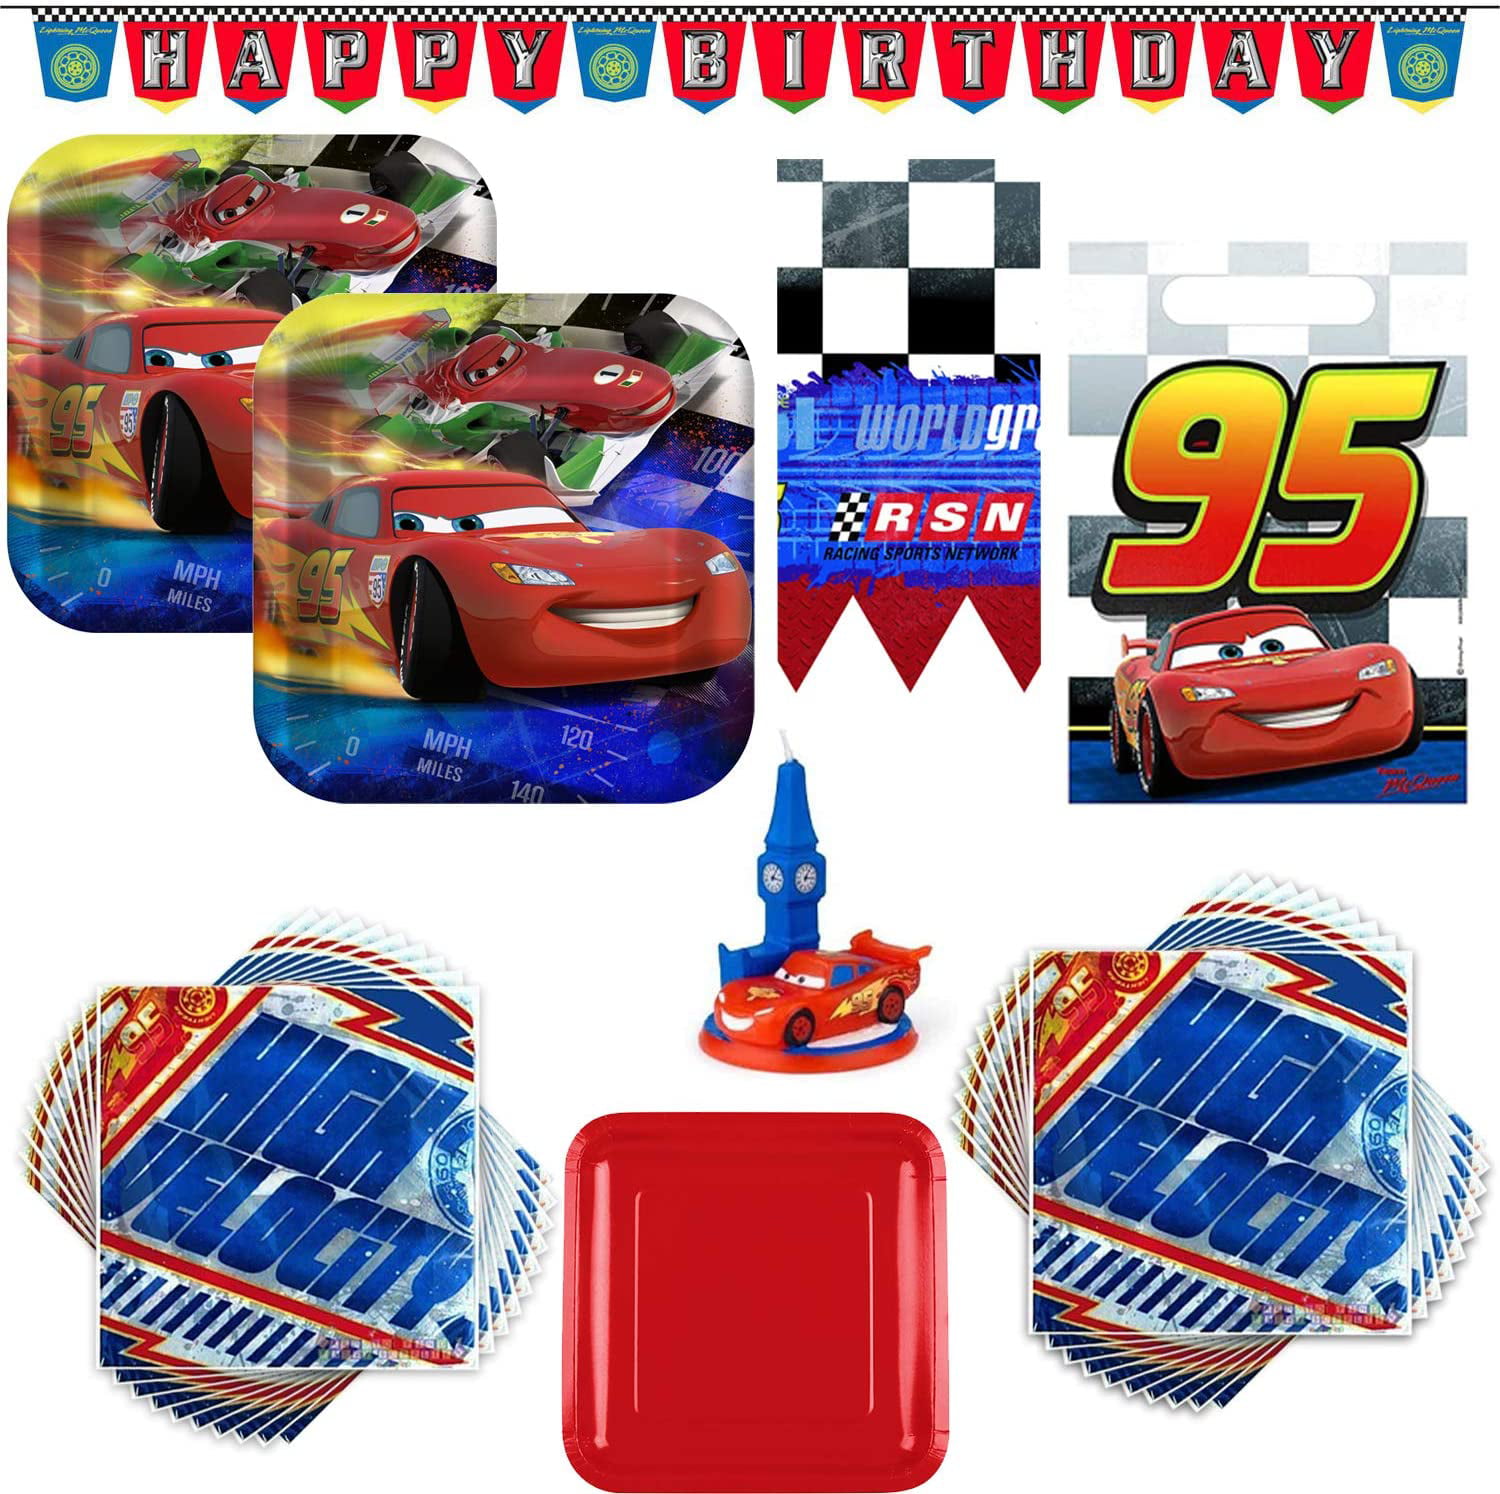 Disney Cars Lightening McQueen Birthday Party Table Tableware Supplies 8 Guests 